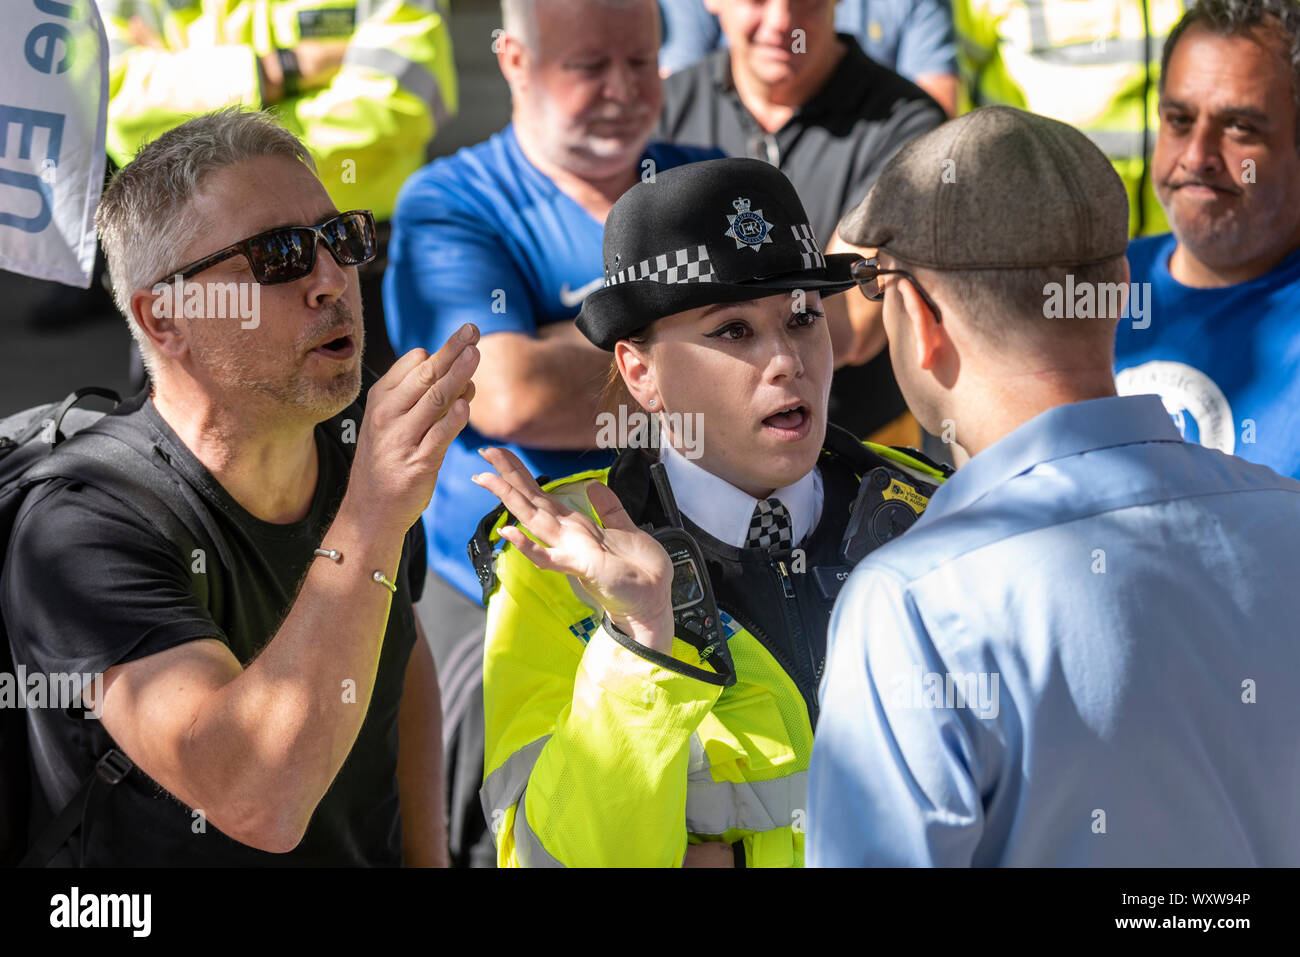 Female police officer separating opposing protesters outside the Supreme Court of the UK in Westminster, London, UK. Angry. Attractive wpc Stock Photo